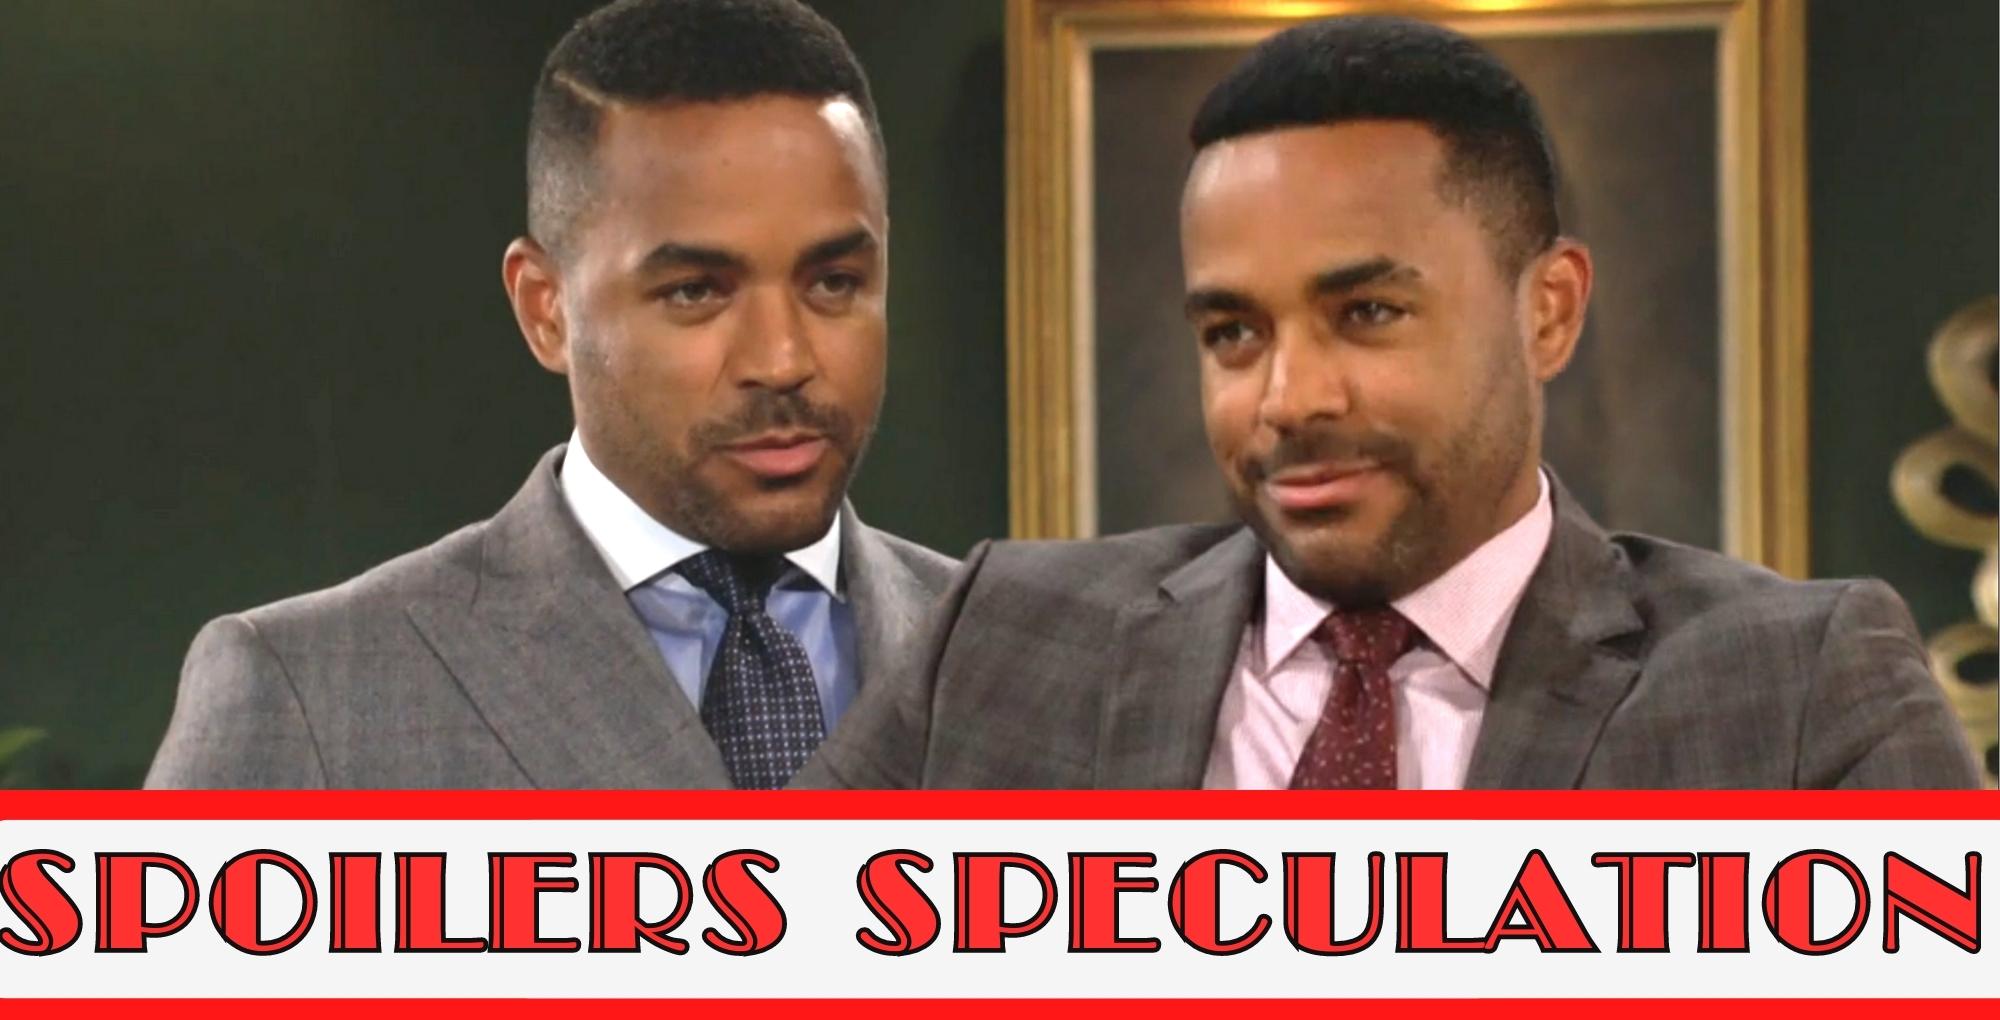 y&r spoilers speculation with two images of nate hastings.